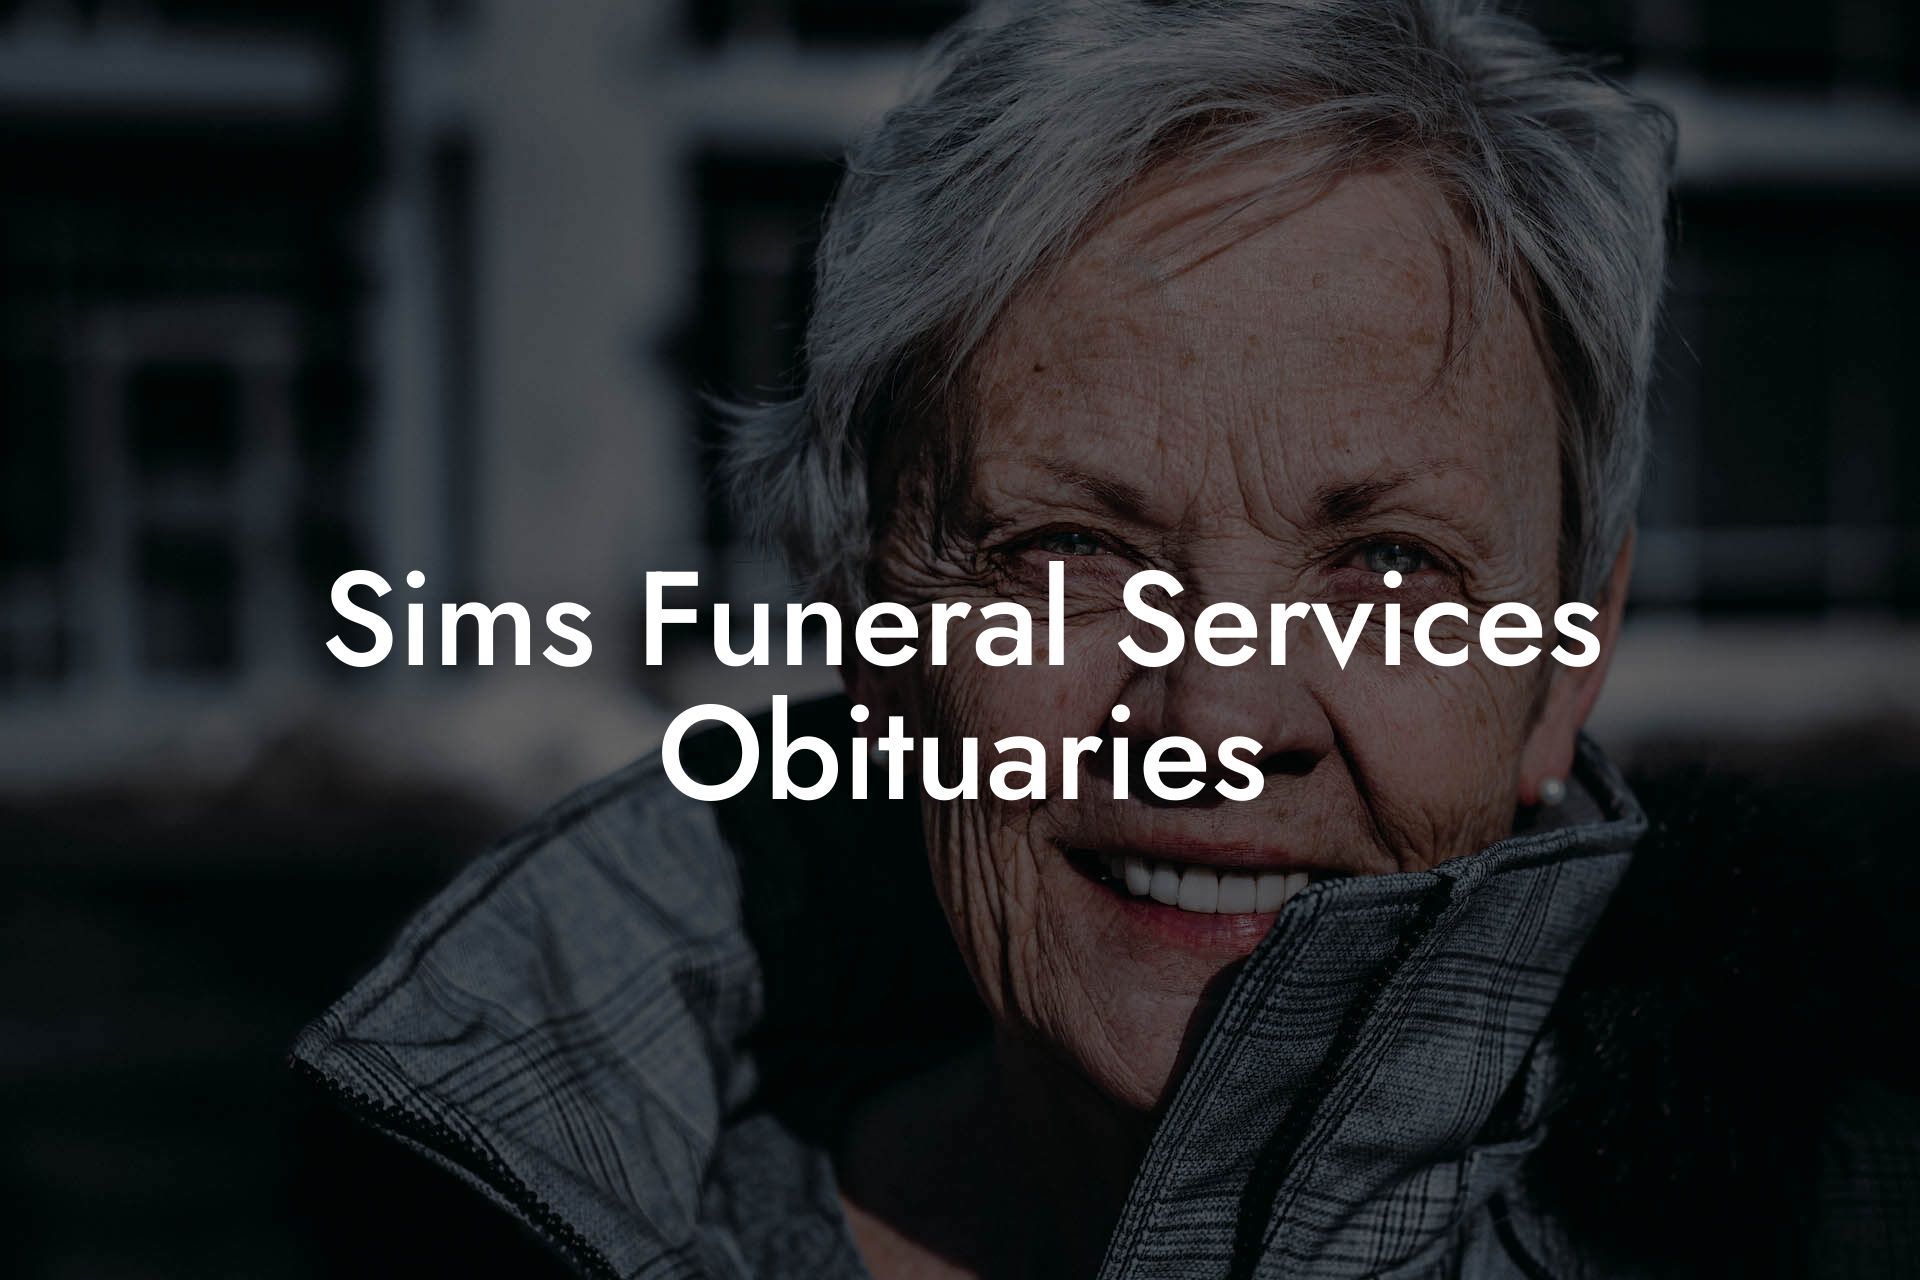 Sims Funeral Services Obituaries